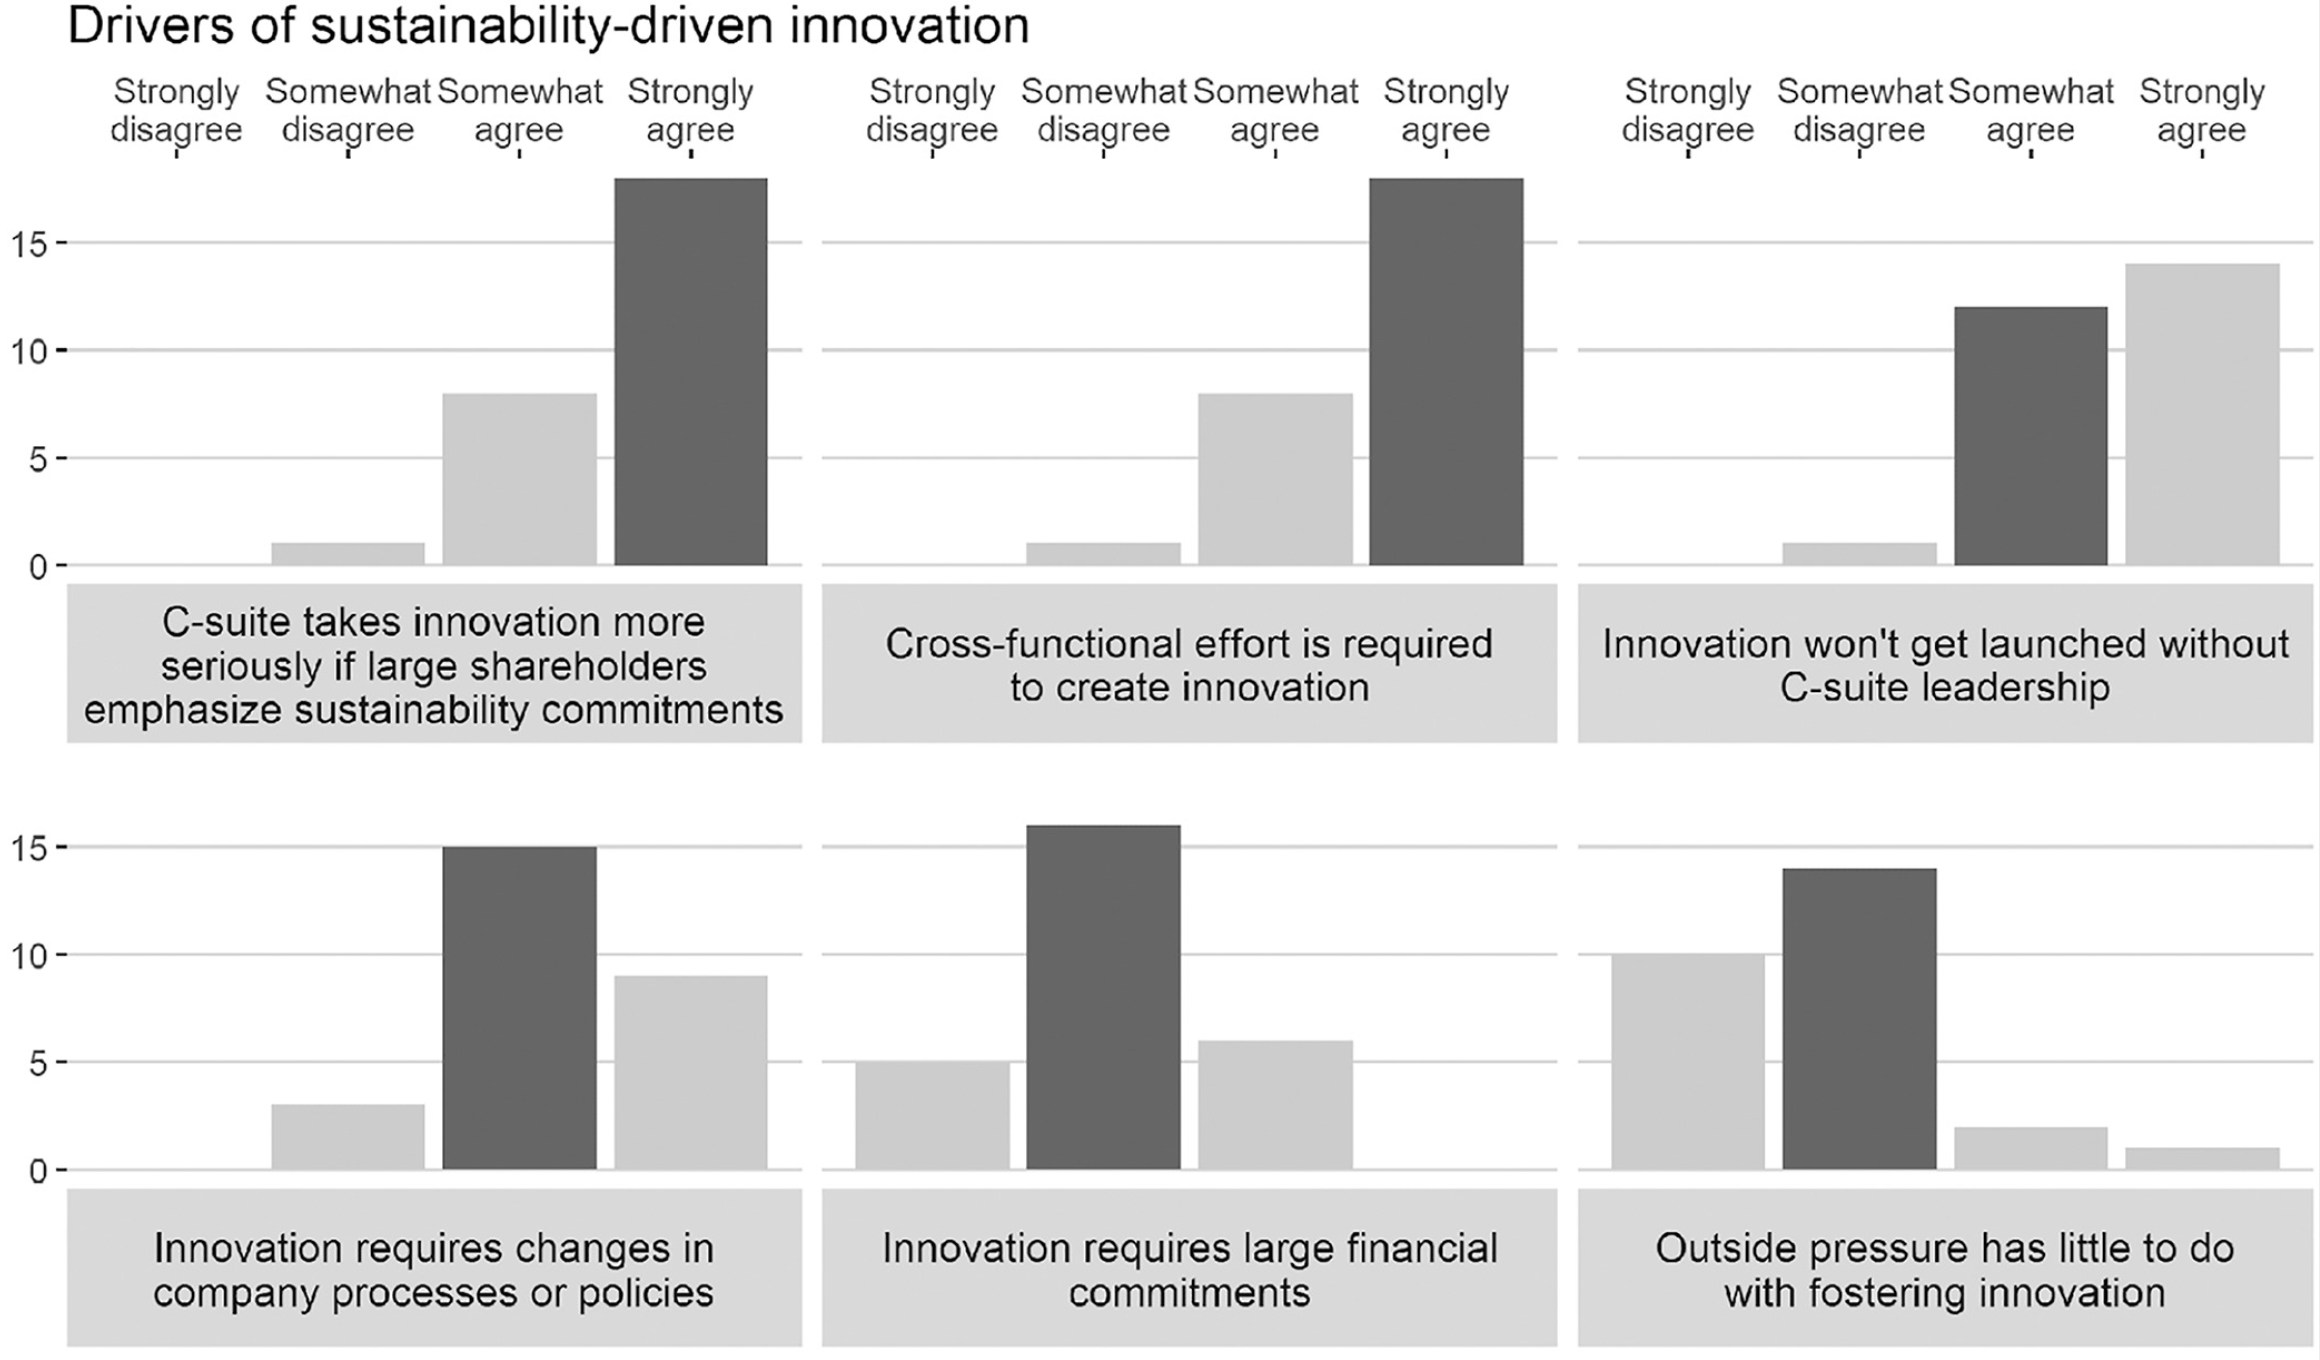 A bar chart for survey responses to drivers of sustainability-driven innovation.